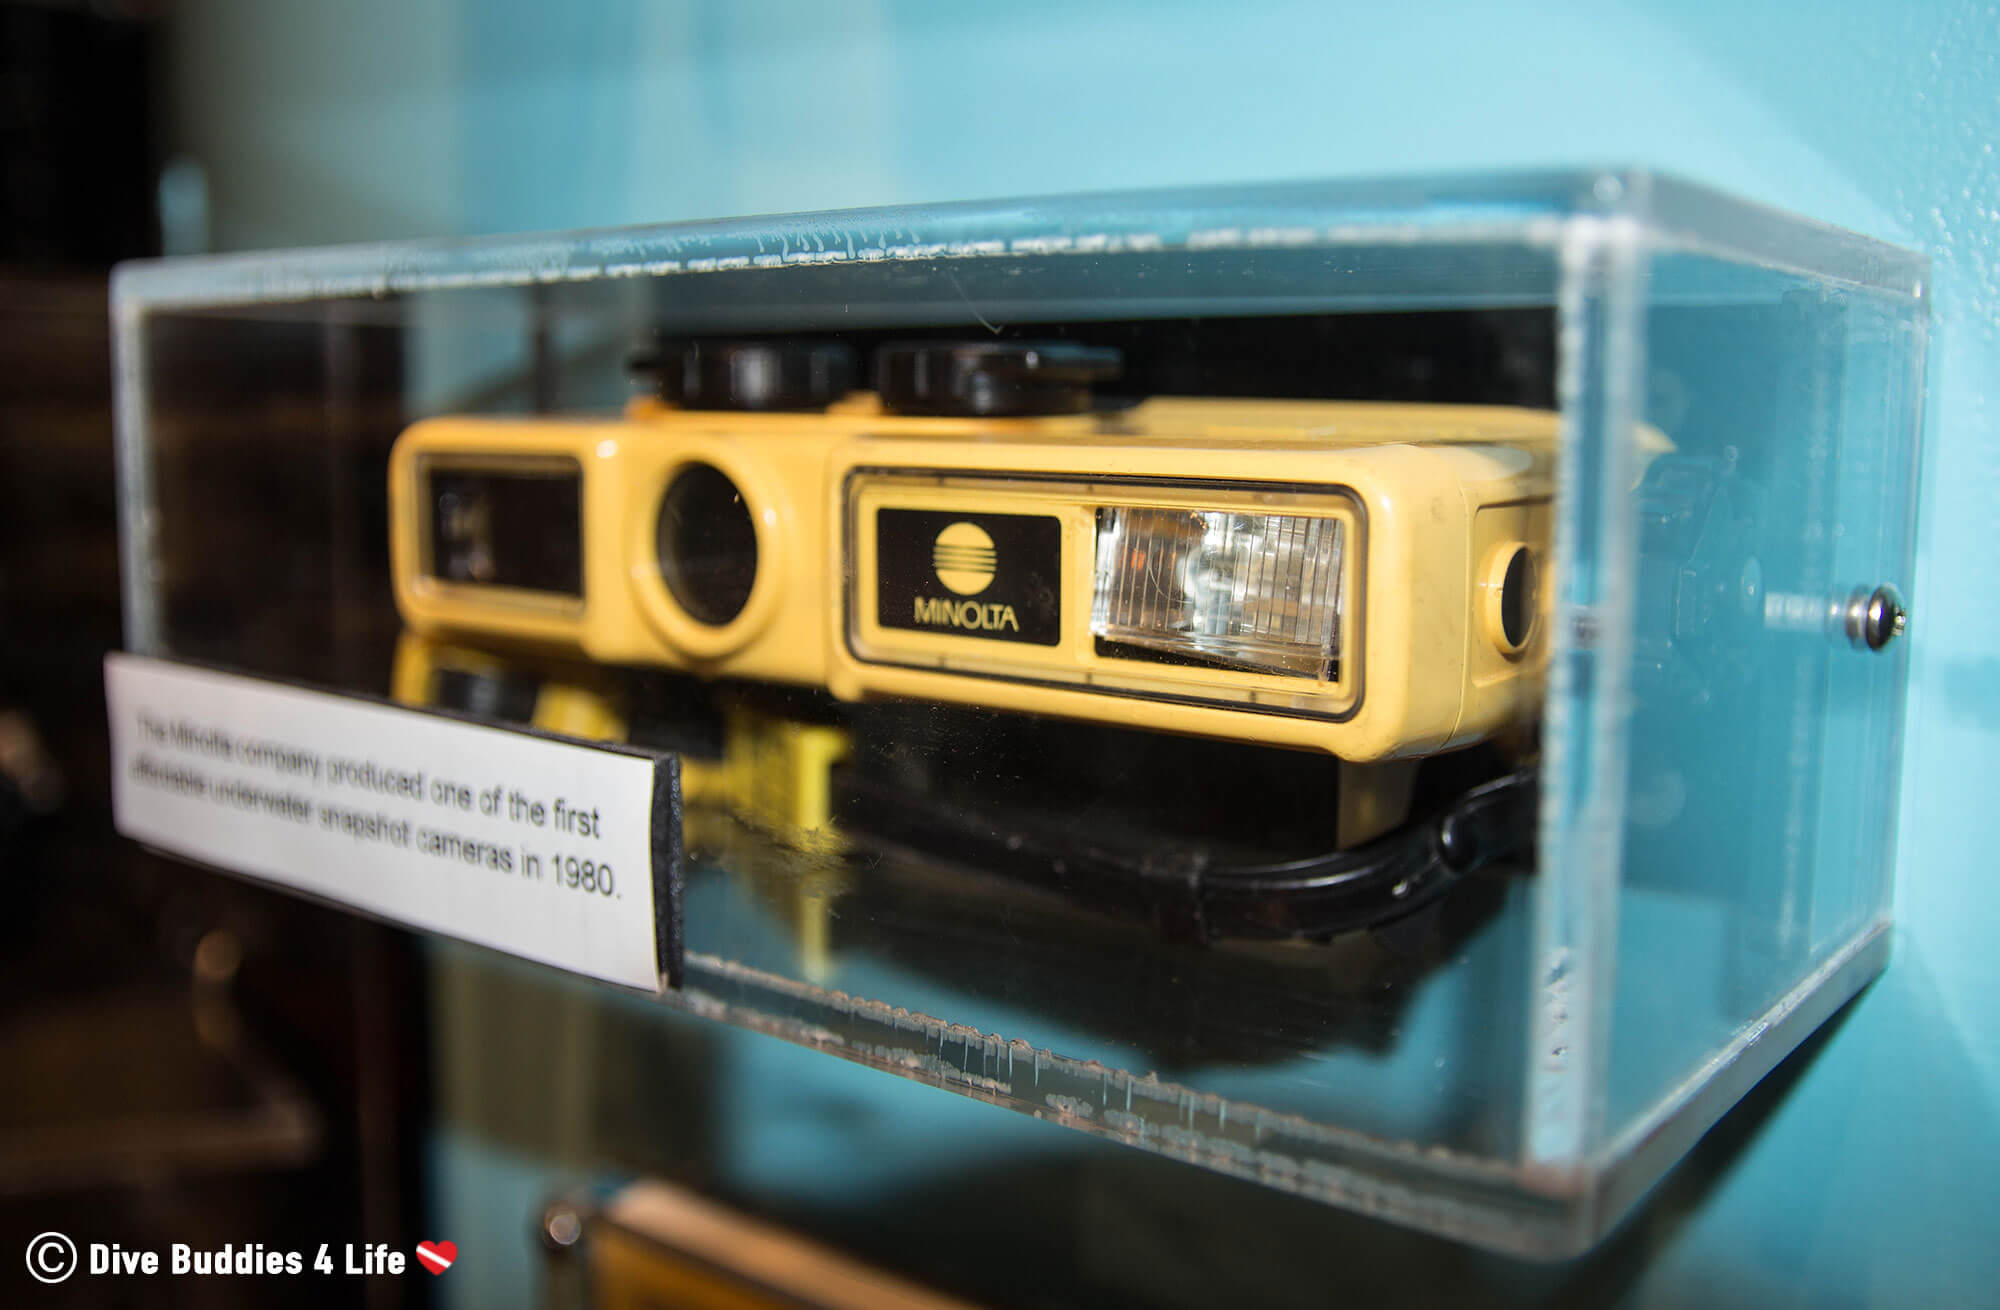 An Ancient Point And Shoot Underwater Camera In A Scuba Diving Museum